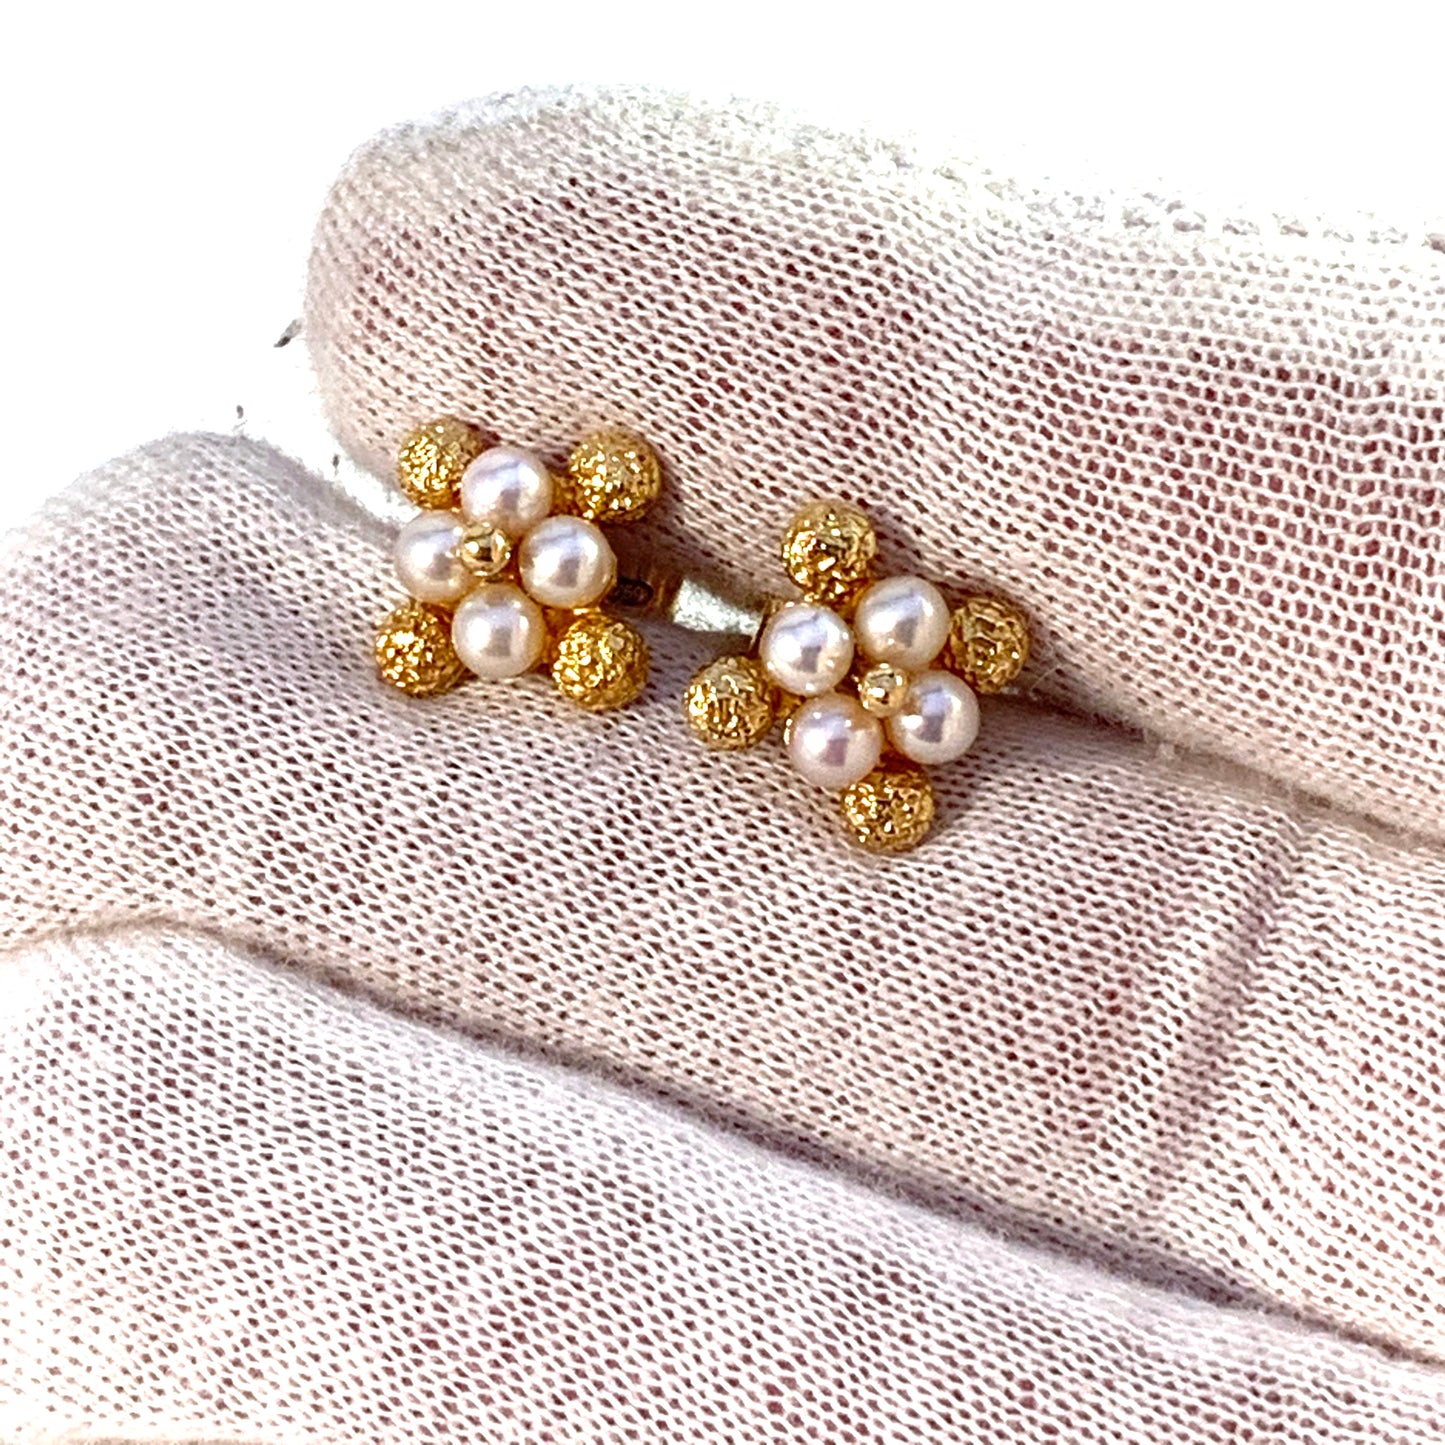 Bjorn Weckstrom for Lapponia, Finland Vintage 18k Gold Cultured Pearl Earrings.